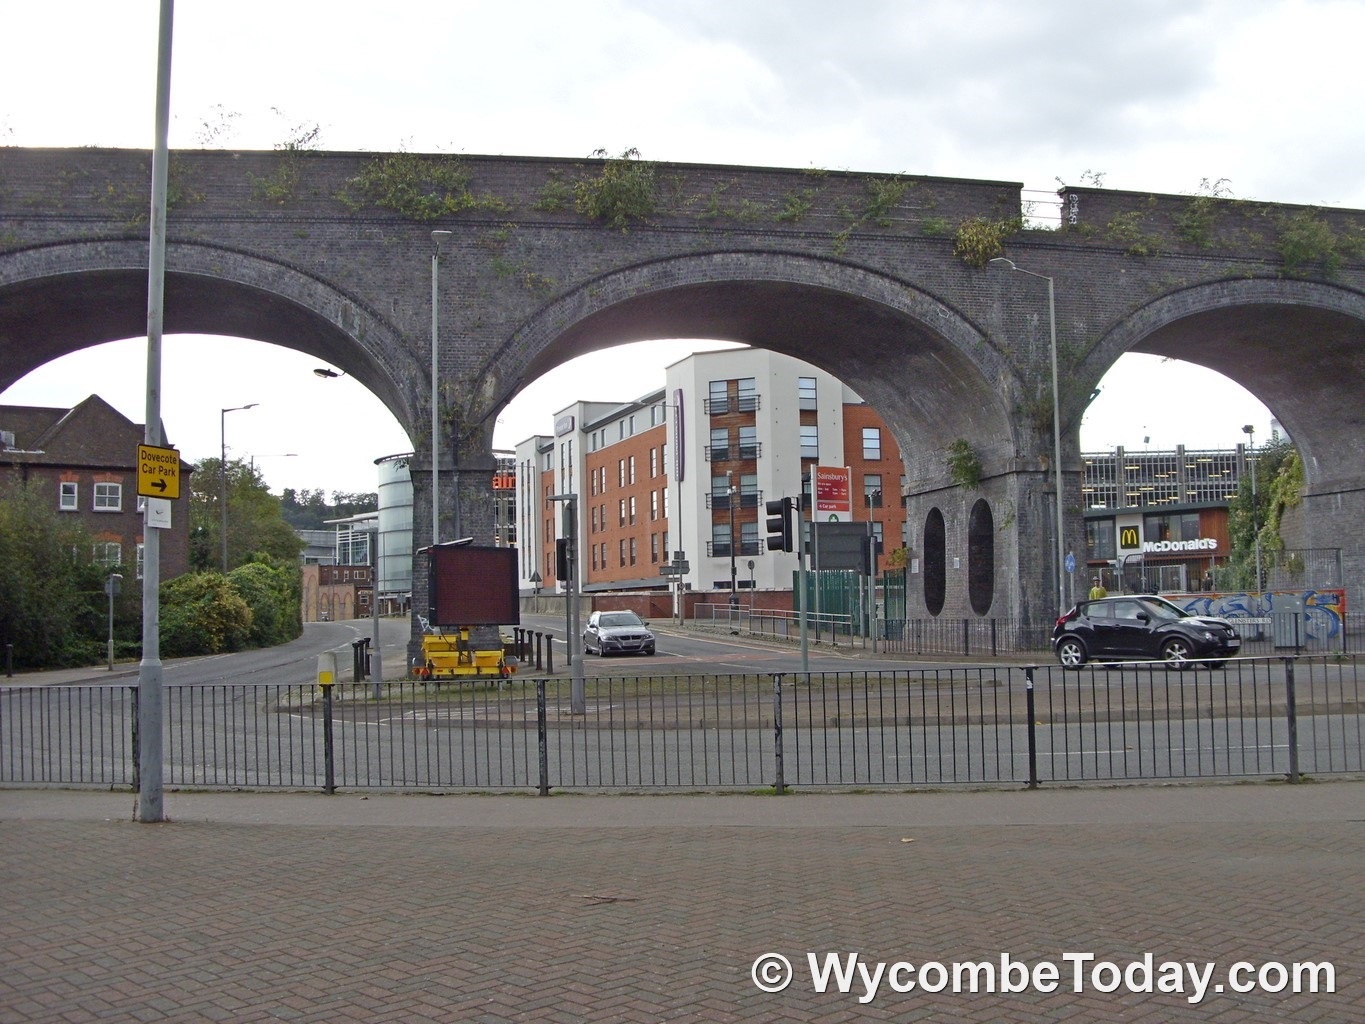 HighWycombe-Archway-2016-10-06-SDC13219